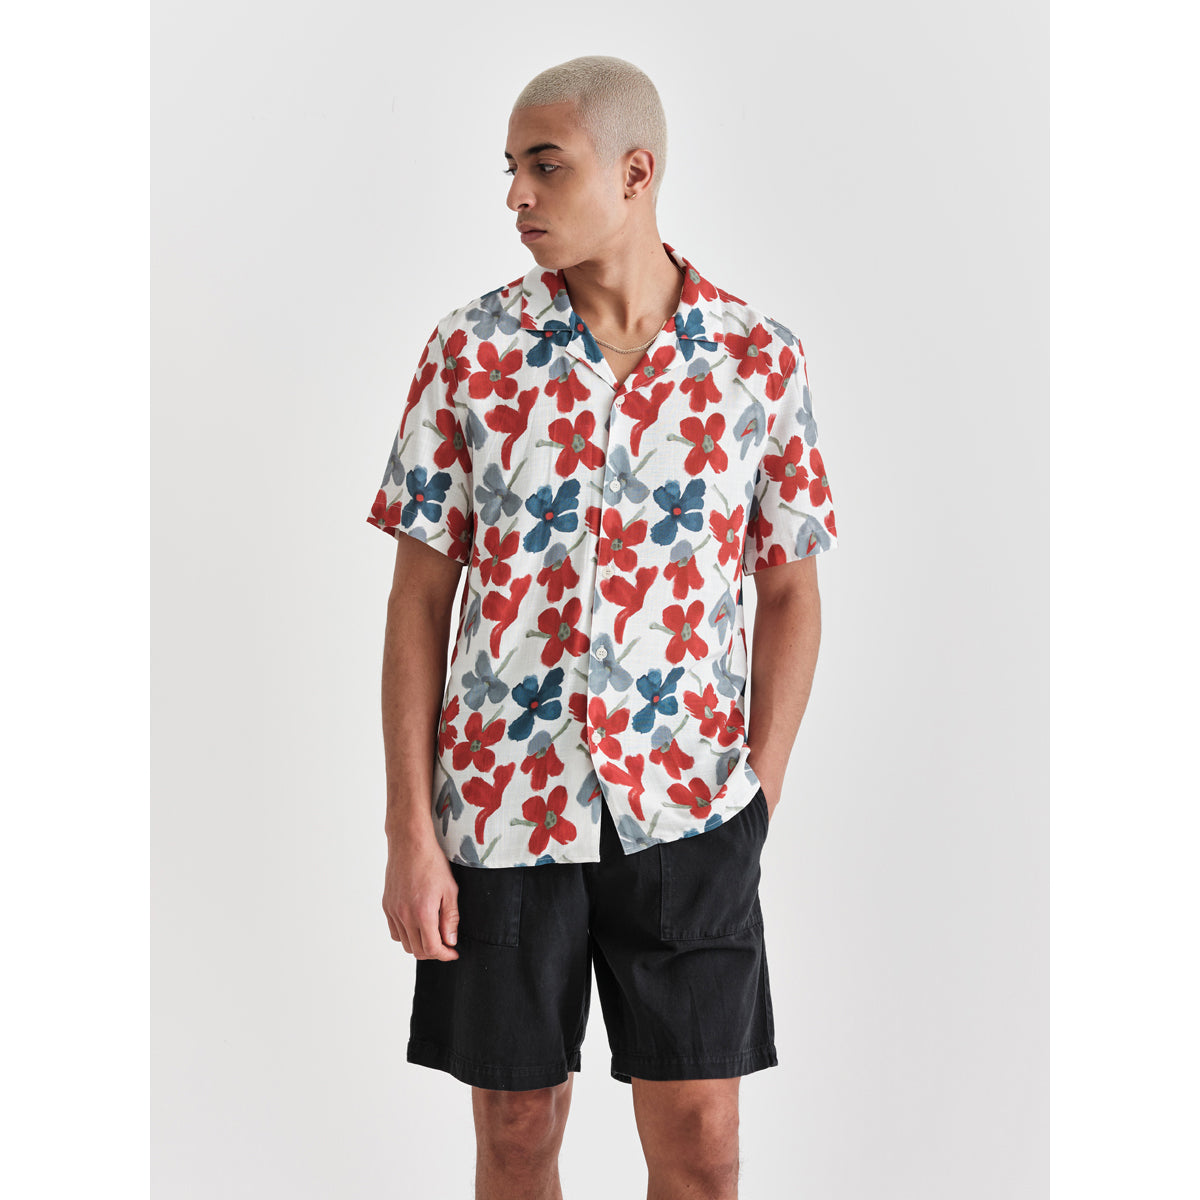 Didcot Shirt-Red/Blue Floral